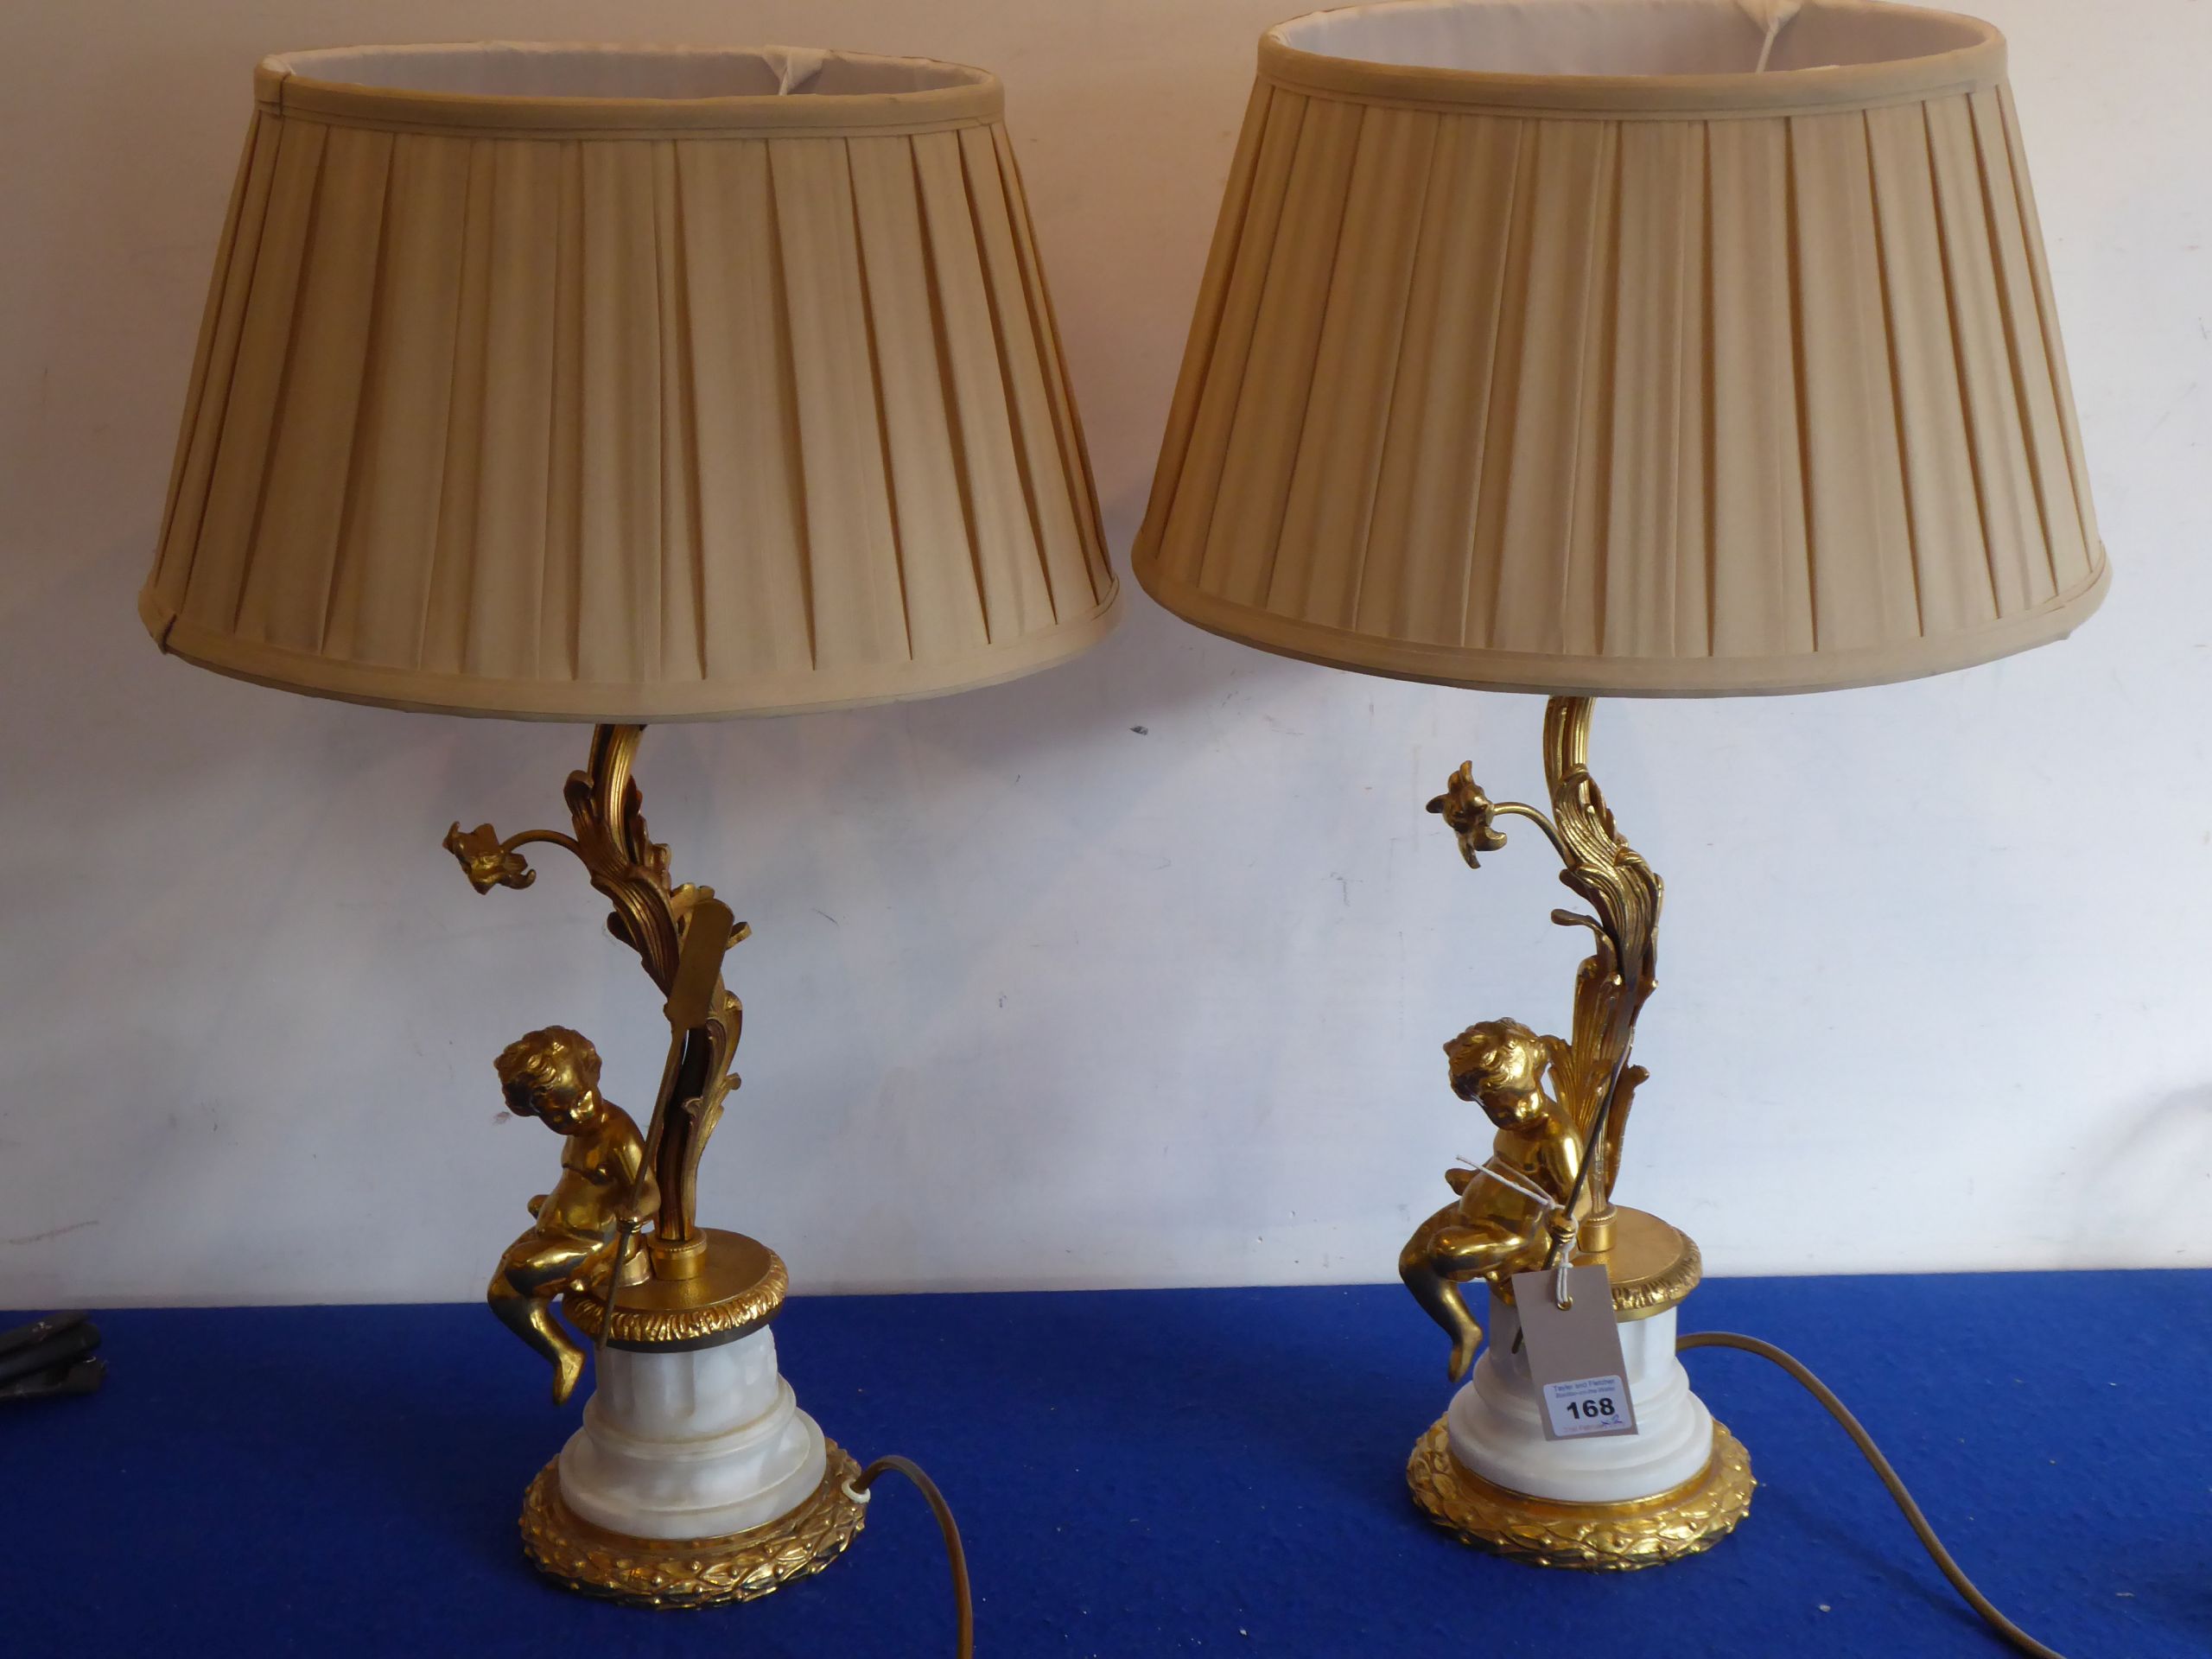 A highly decorative pair of French-style gilt-bronze table lamps and shades;